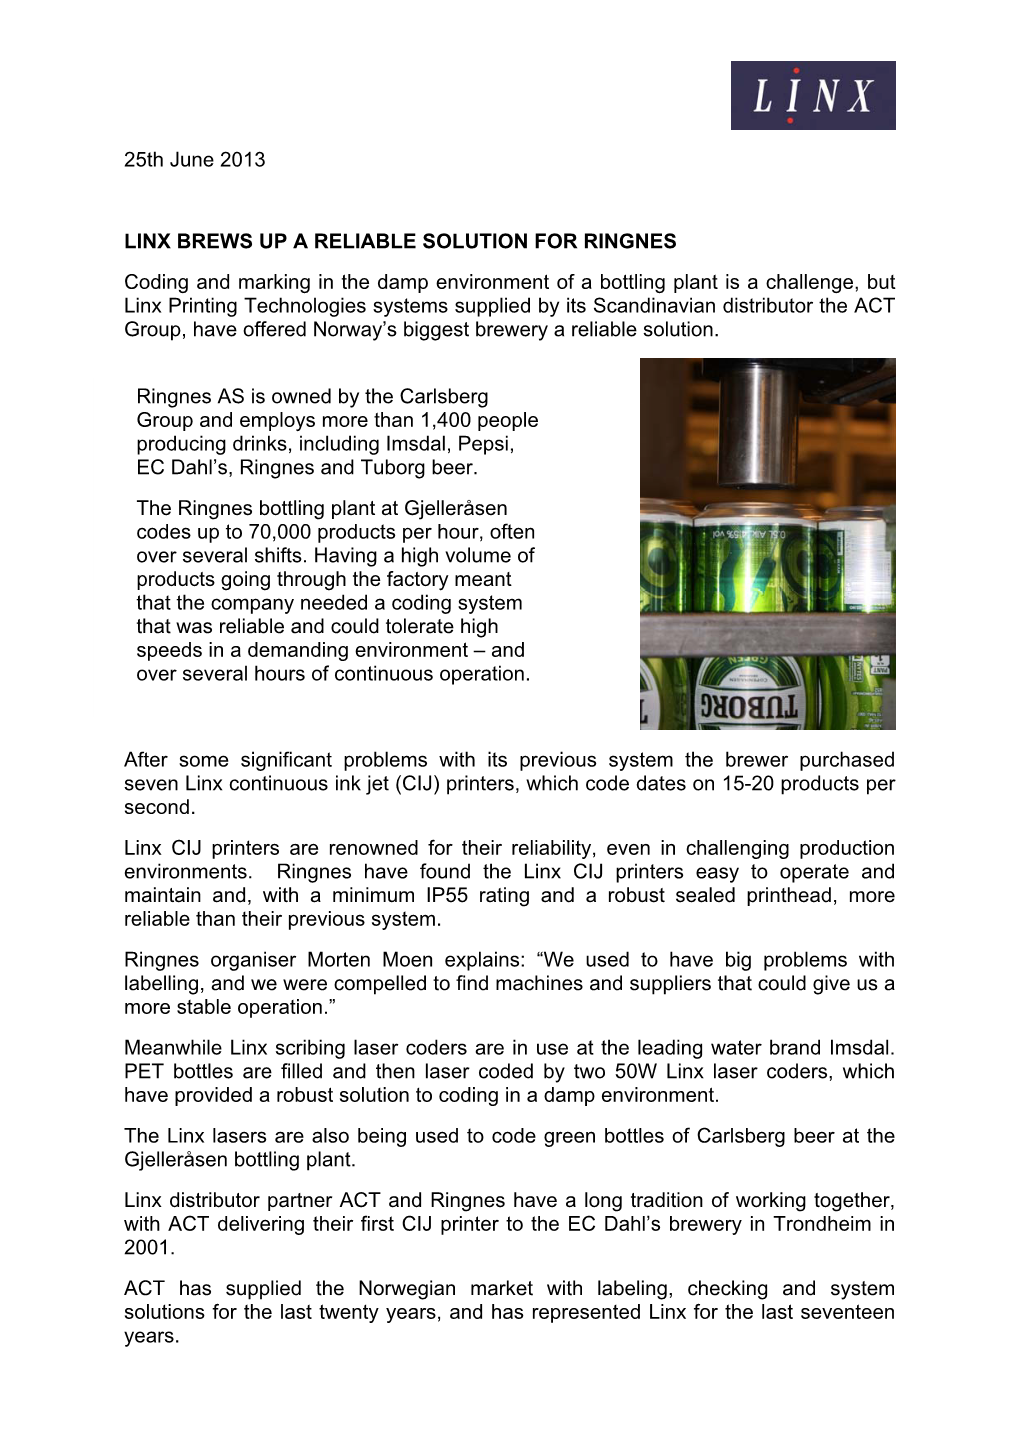 25Th June 2013 LINX BREWS up a RELIABLE SOLUTION for RINGNES Coding and Marking in the Damp Environment of a Bottling Plant Is A